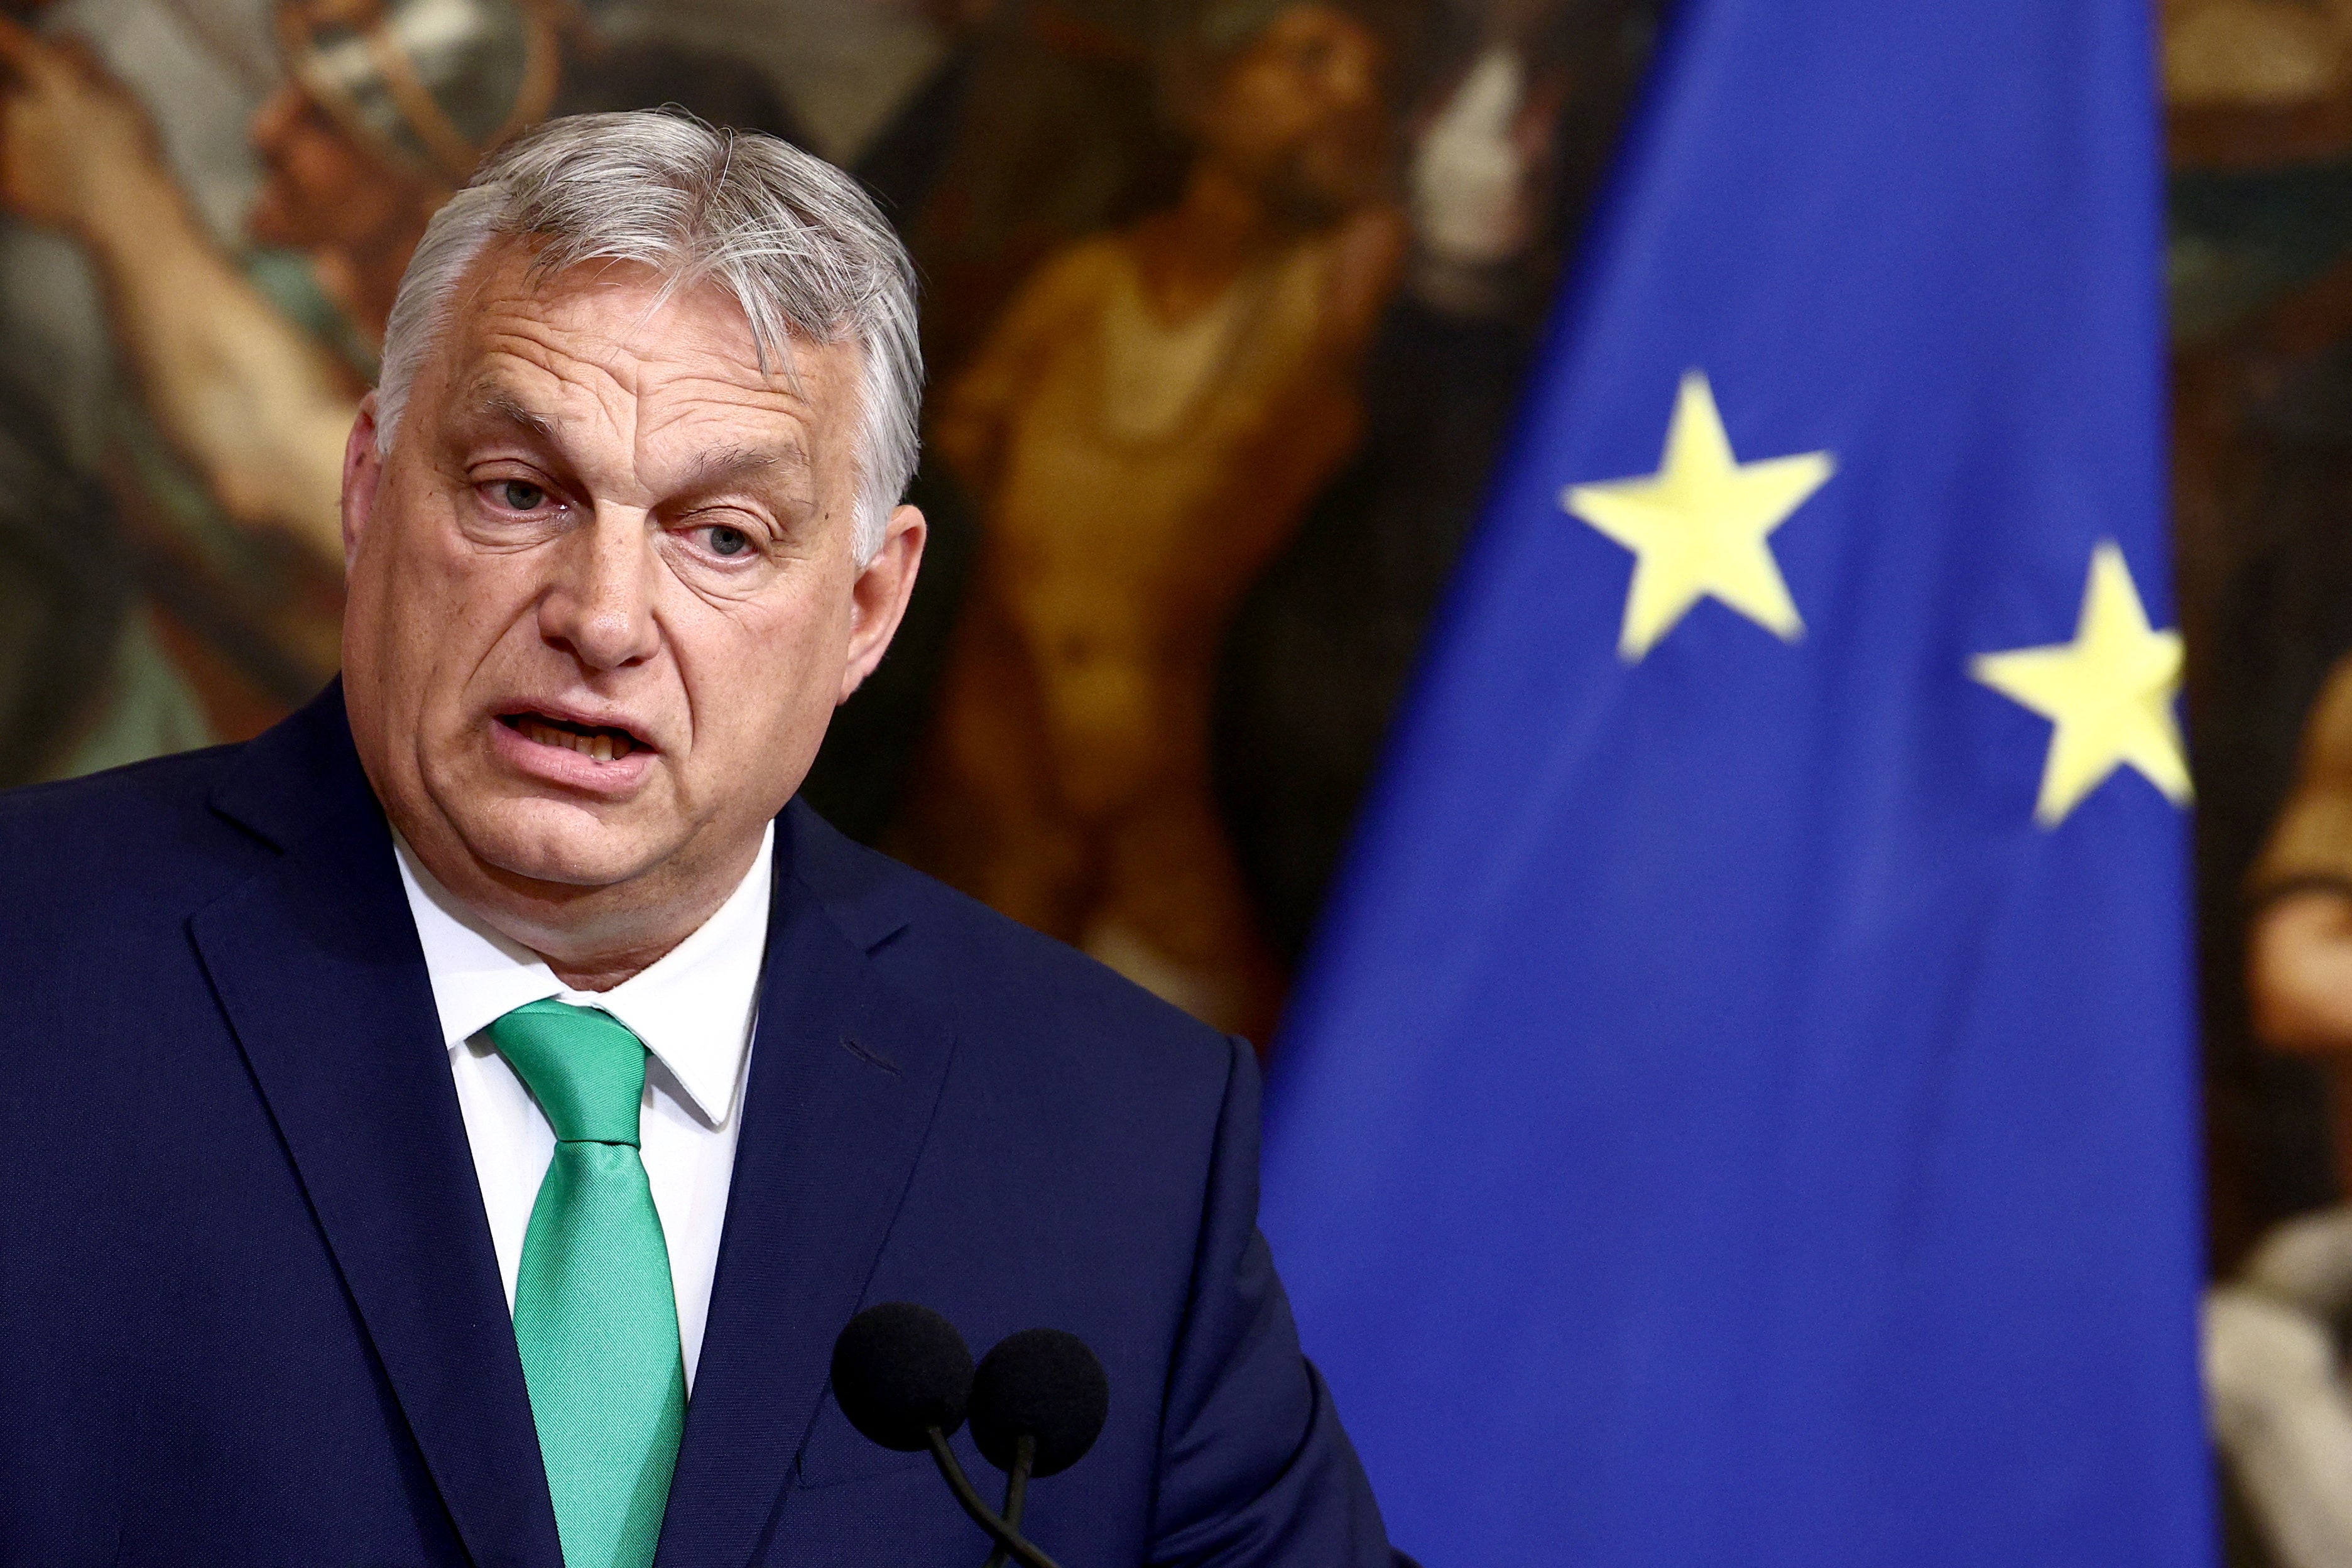 Hungarian Prime Minister Viktor Orban made a statement after a meeting with Italian prime minister Giorgia Meloni at Palazzo Chigi, in Rome, one of its allies in the European Union.